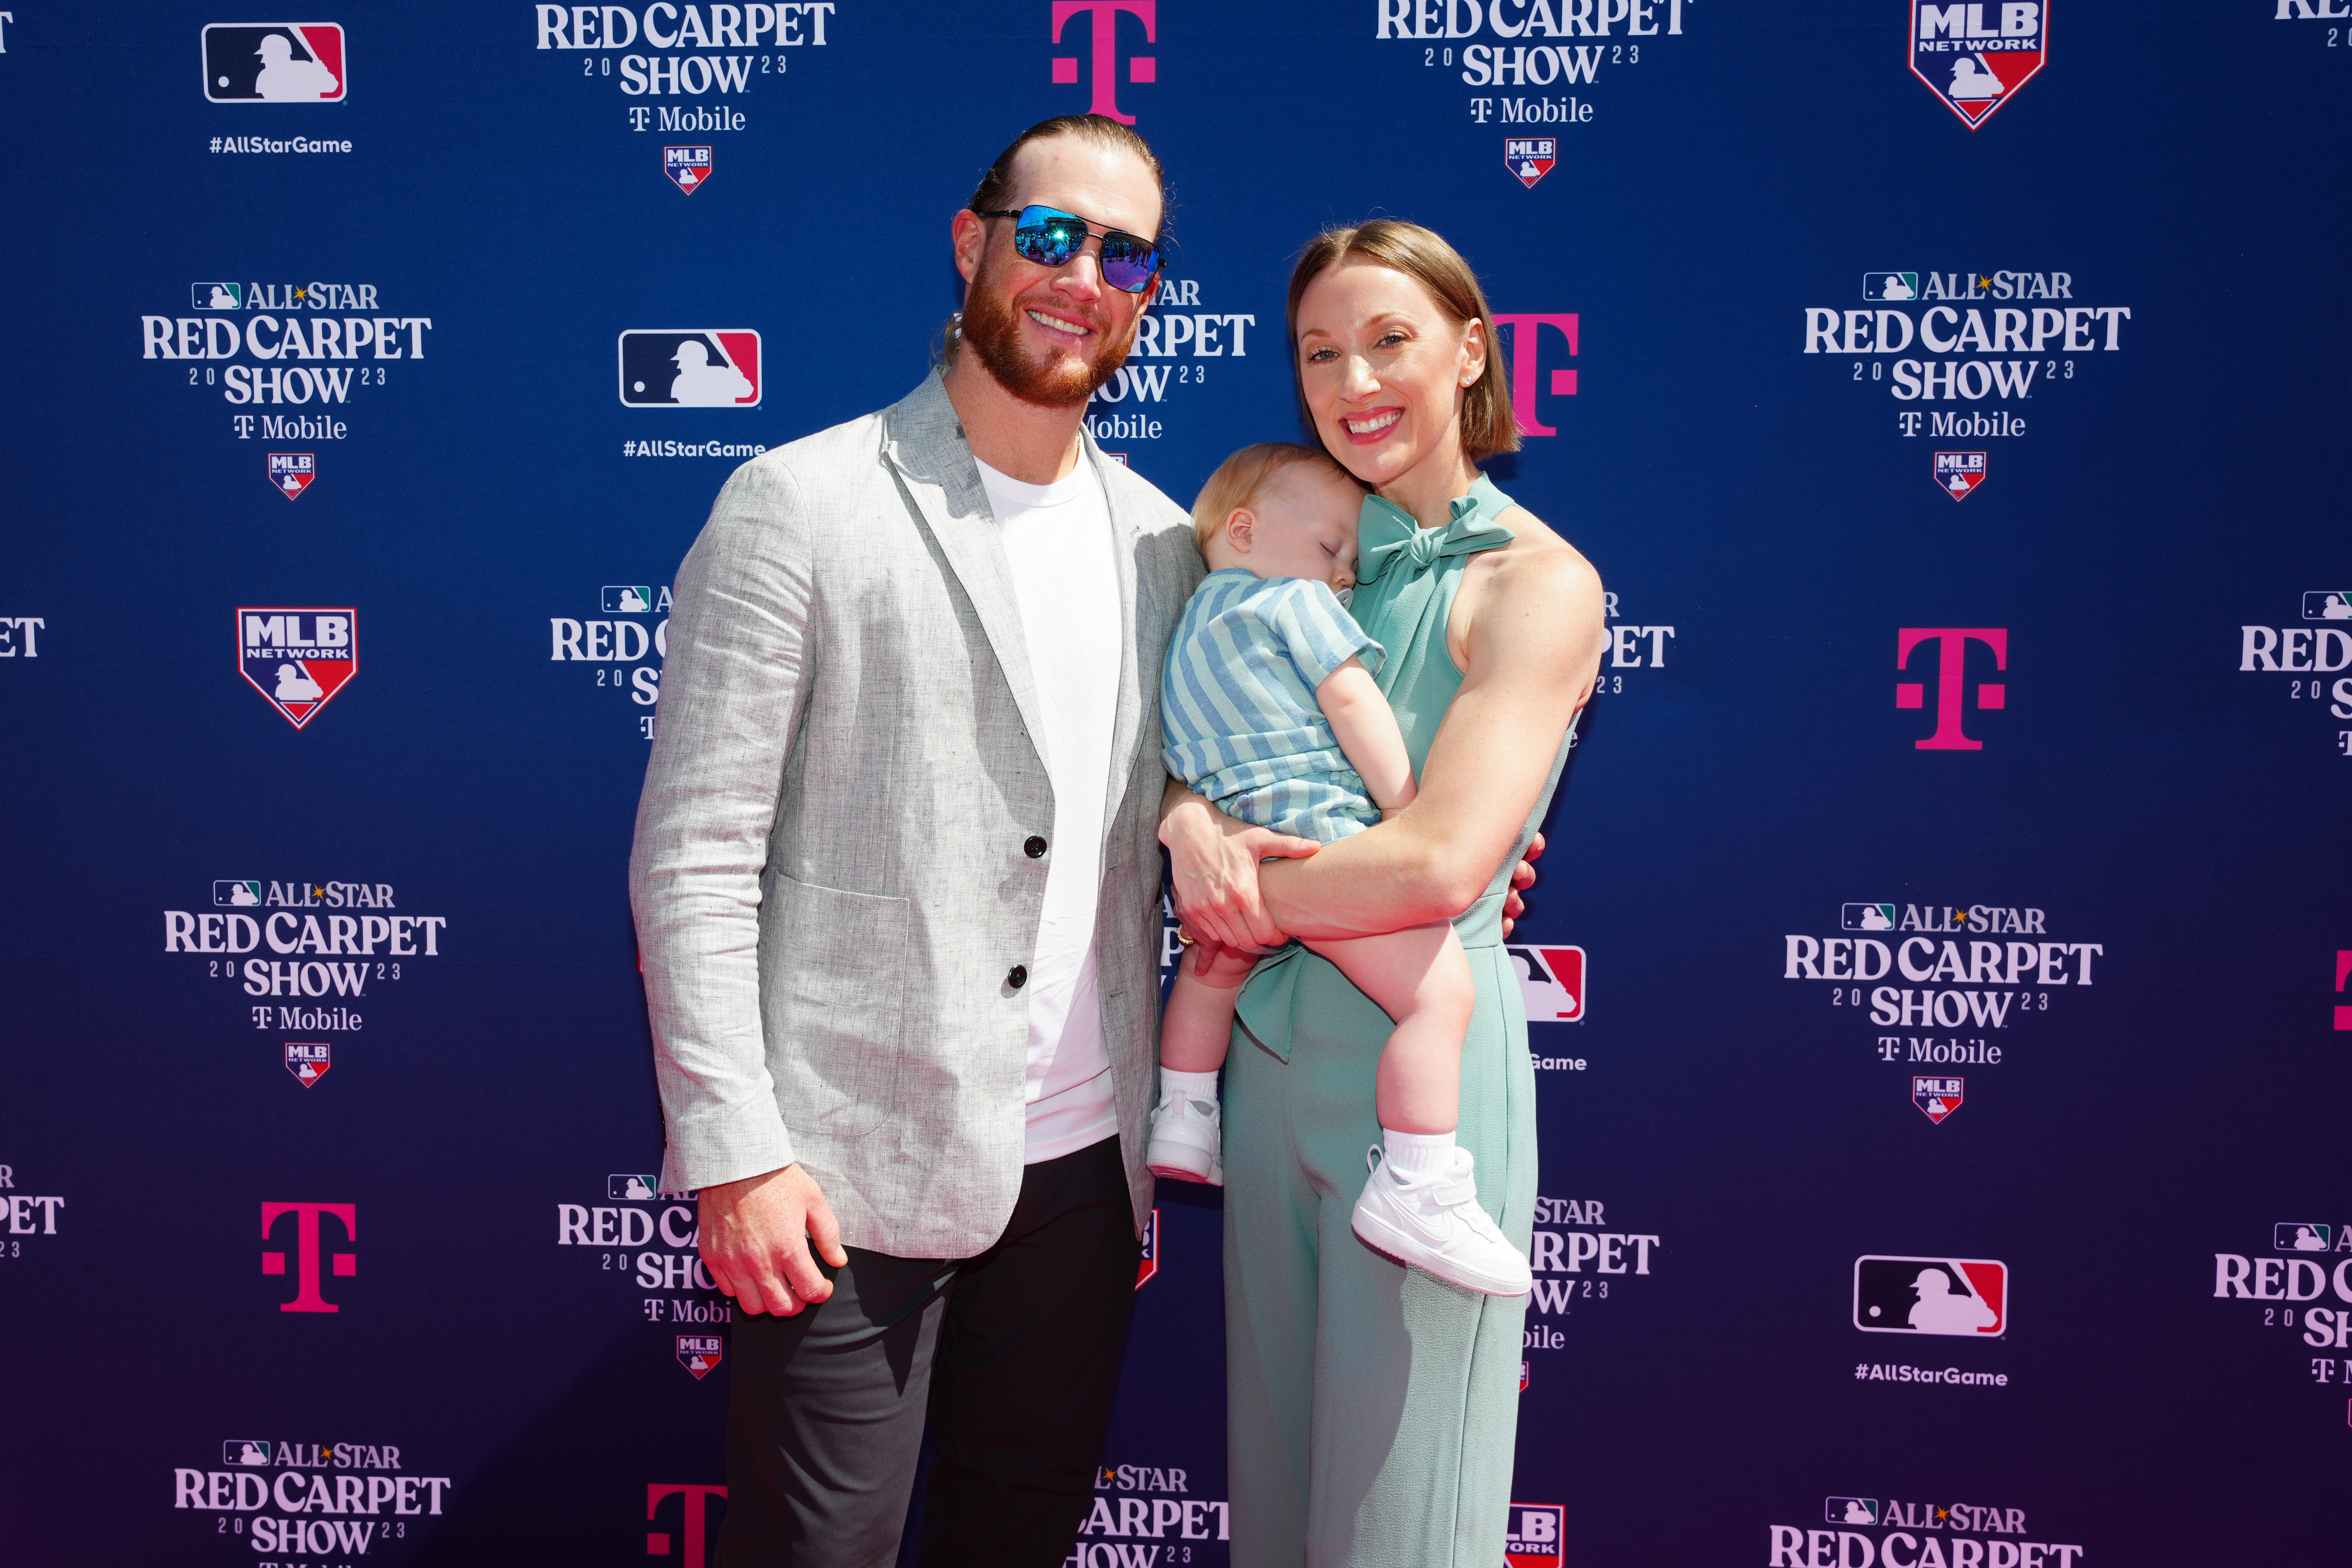 Craig Kimbrel and Ashley Holt Kimbrel with their son Joseph Kimbrel at Pike Place Market on Tuesday, July 11, 2023, in Seattle, Washington. | Source: Getty Images